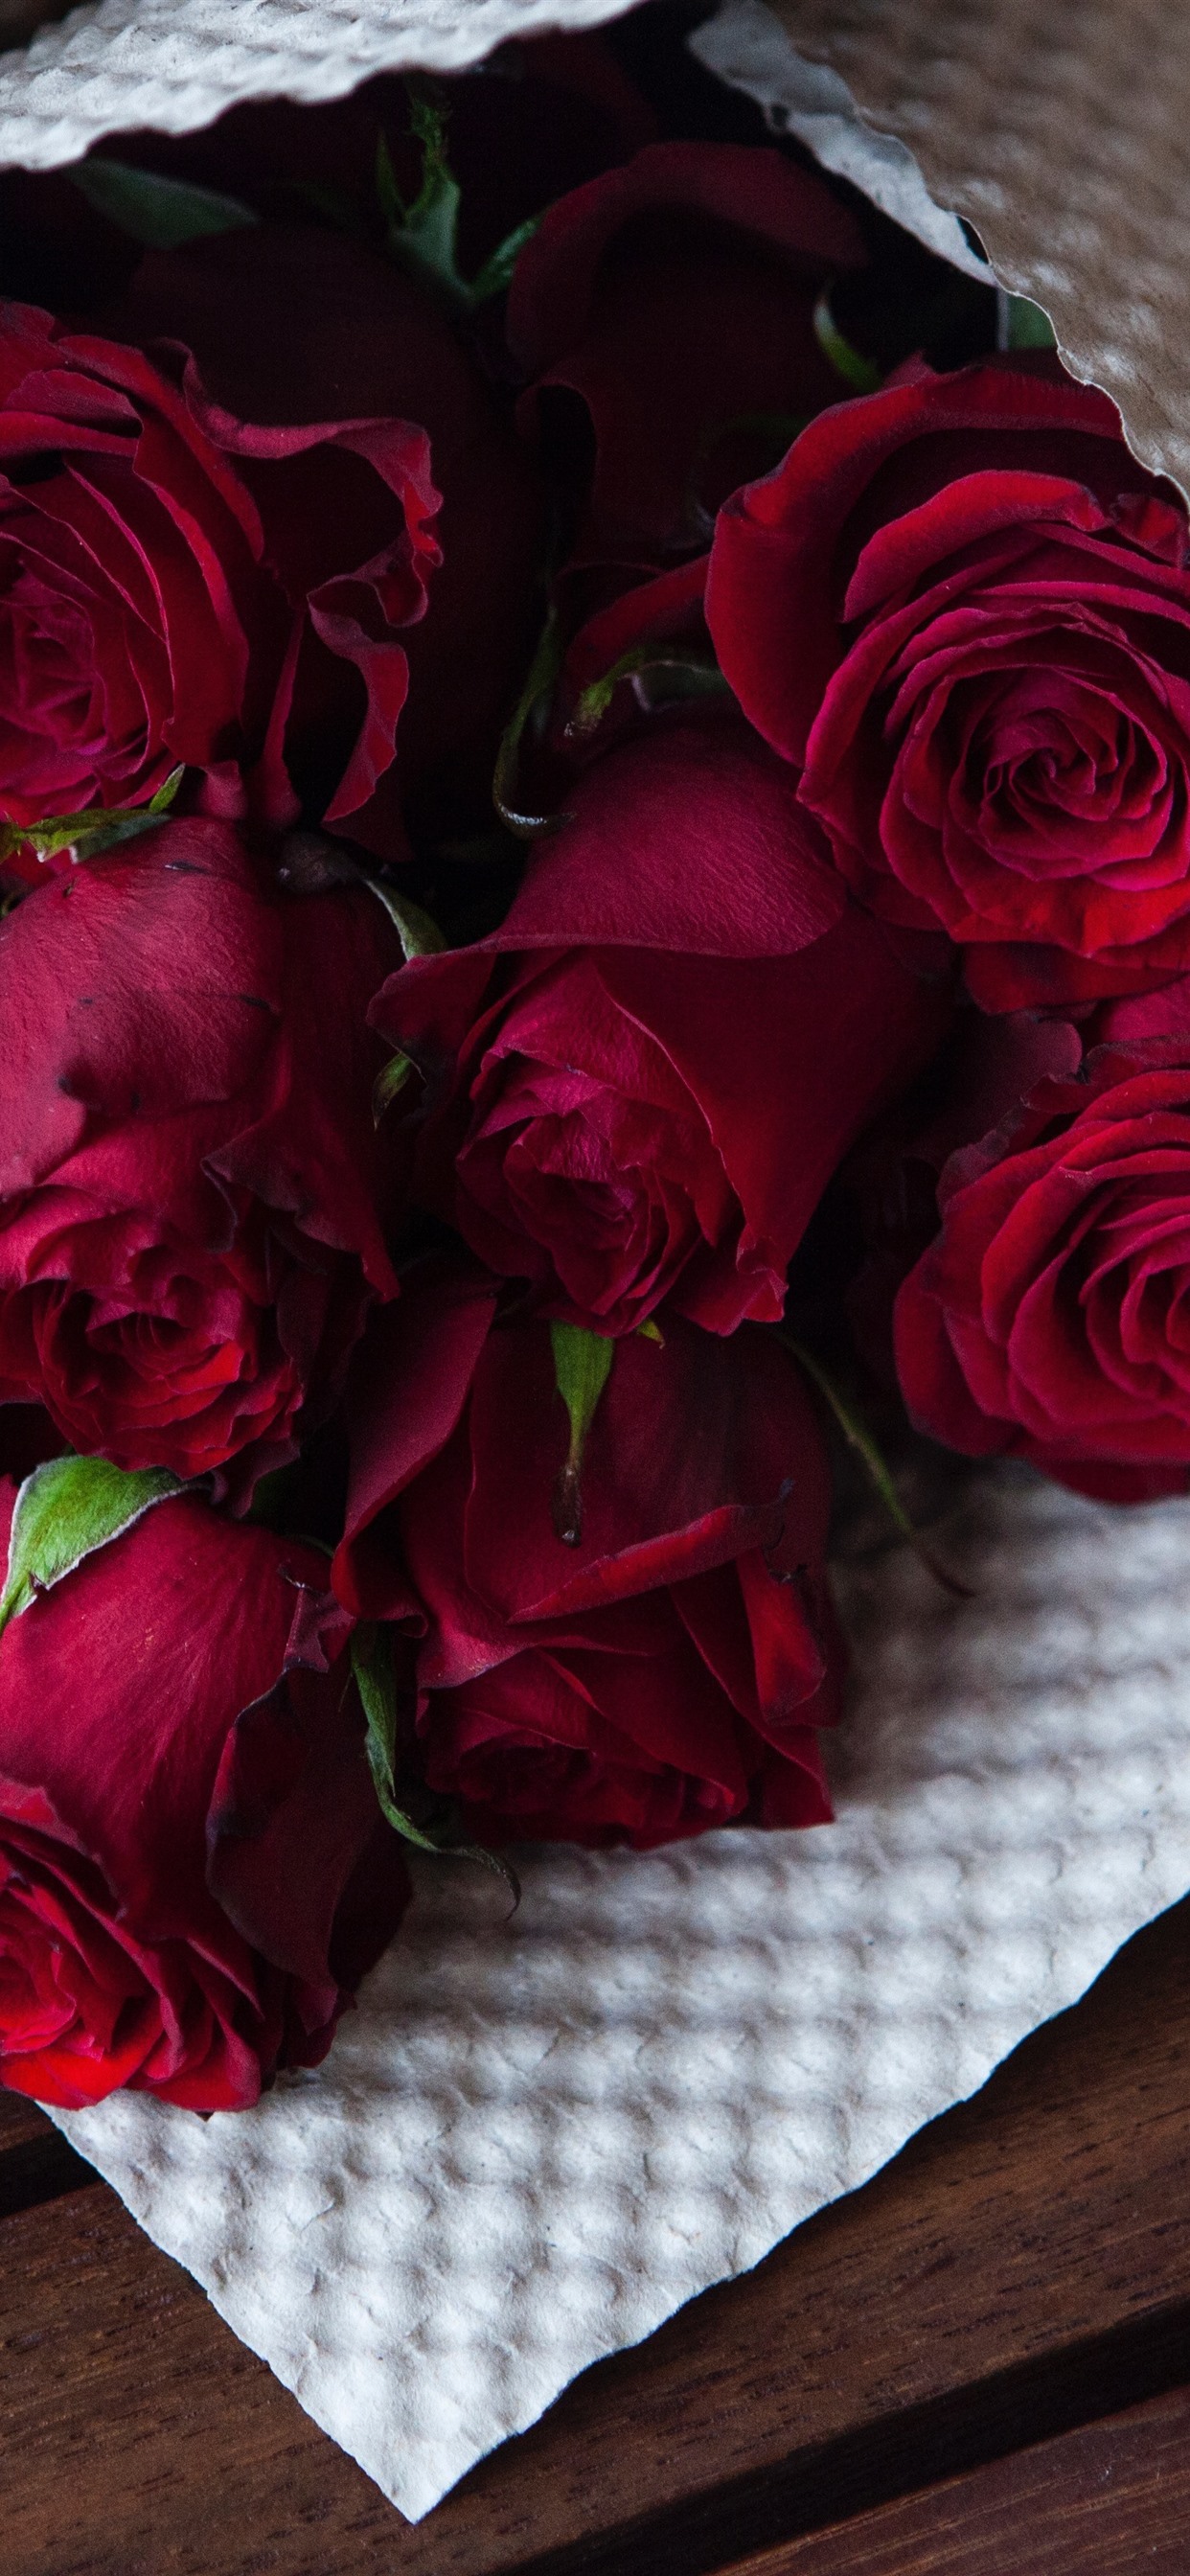 Iphone Wallpaper Bouquet, Red Roses - Iphone Bouquet Red Roses - HD Wallpaper 